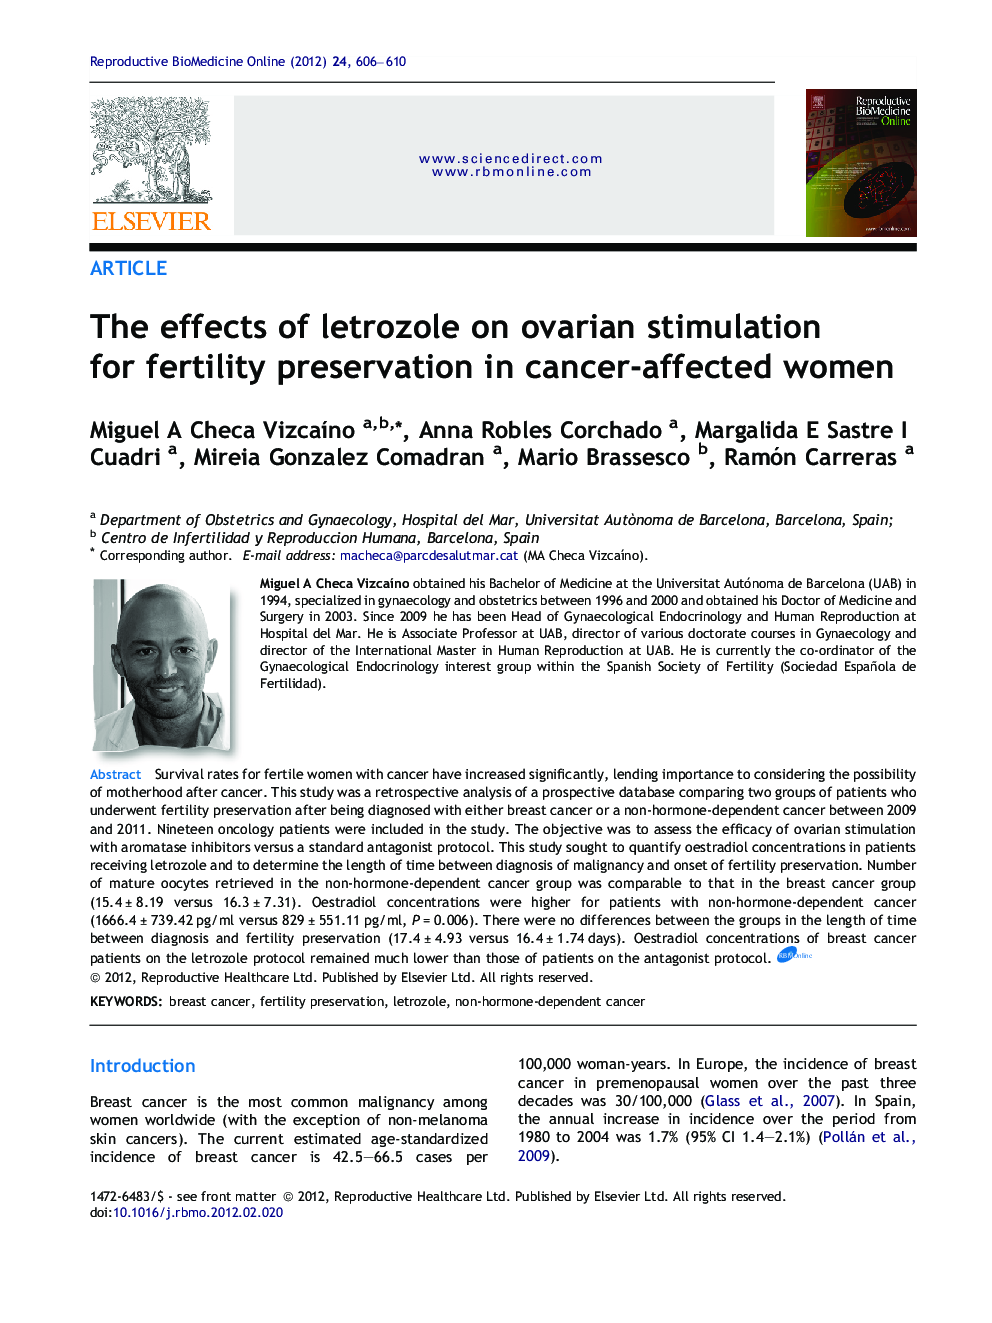 The effects of letrozole on ovarian stimulation for fertility preservation in cancer-affected women 